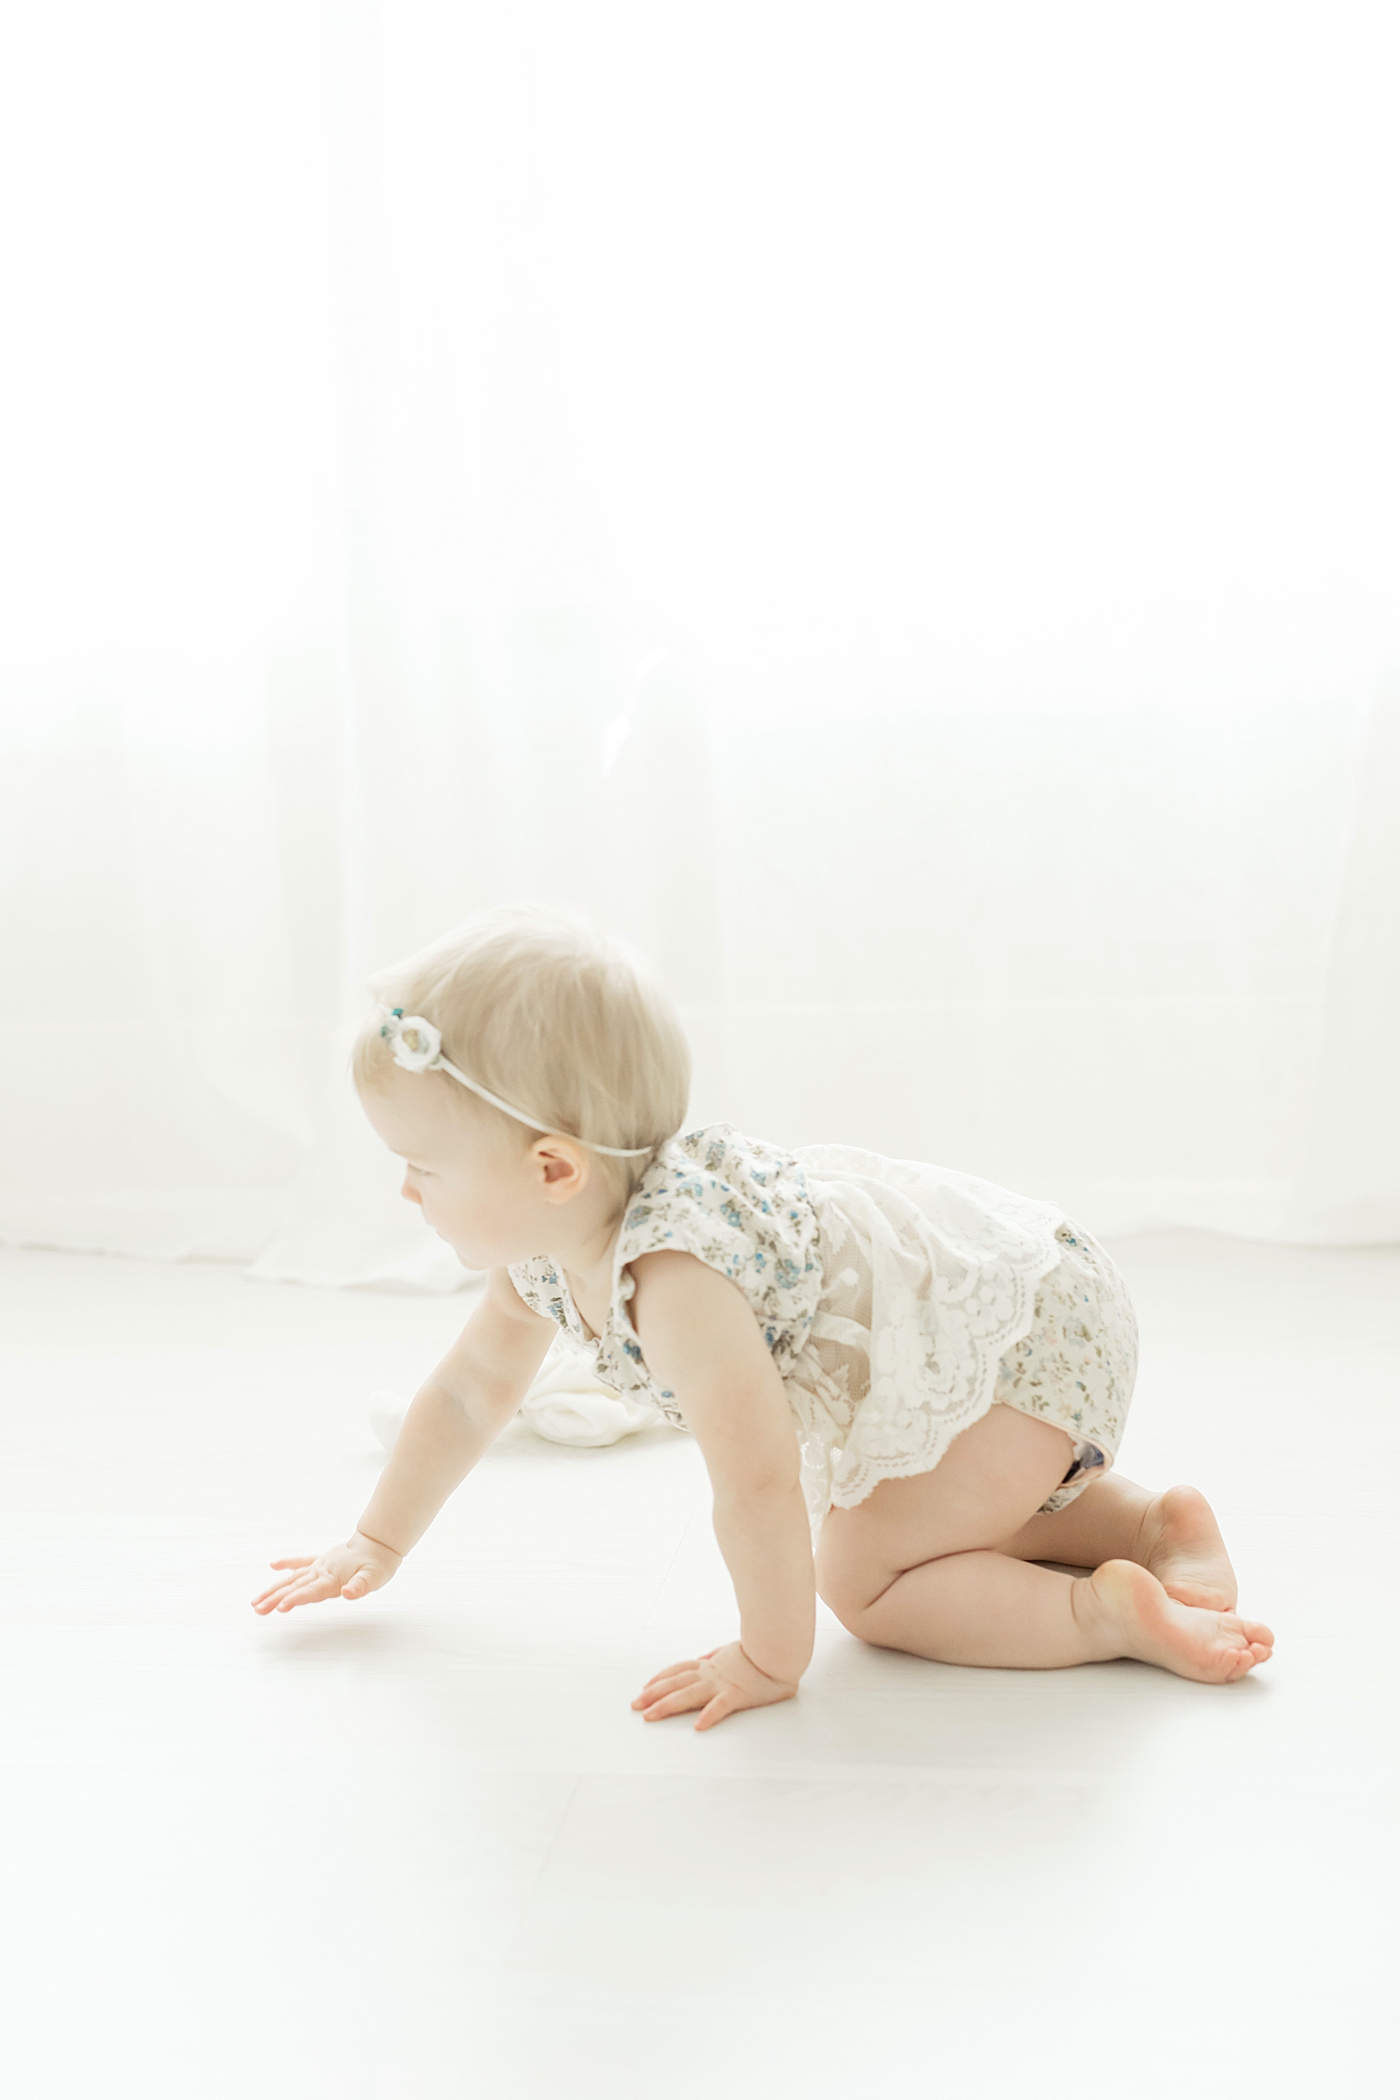 Baby crawling in white studio. Photo by Fresh Light Photography.